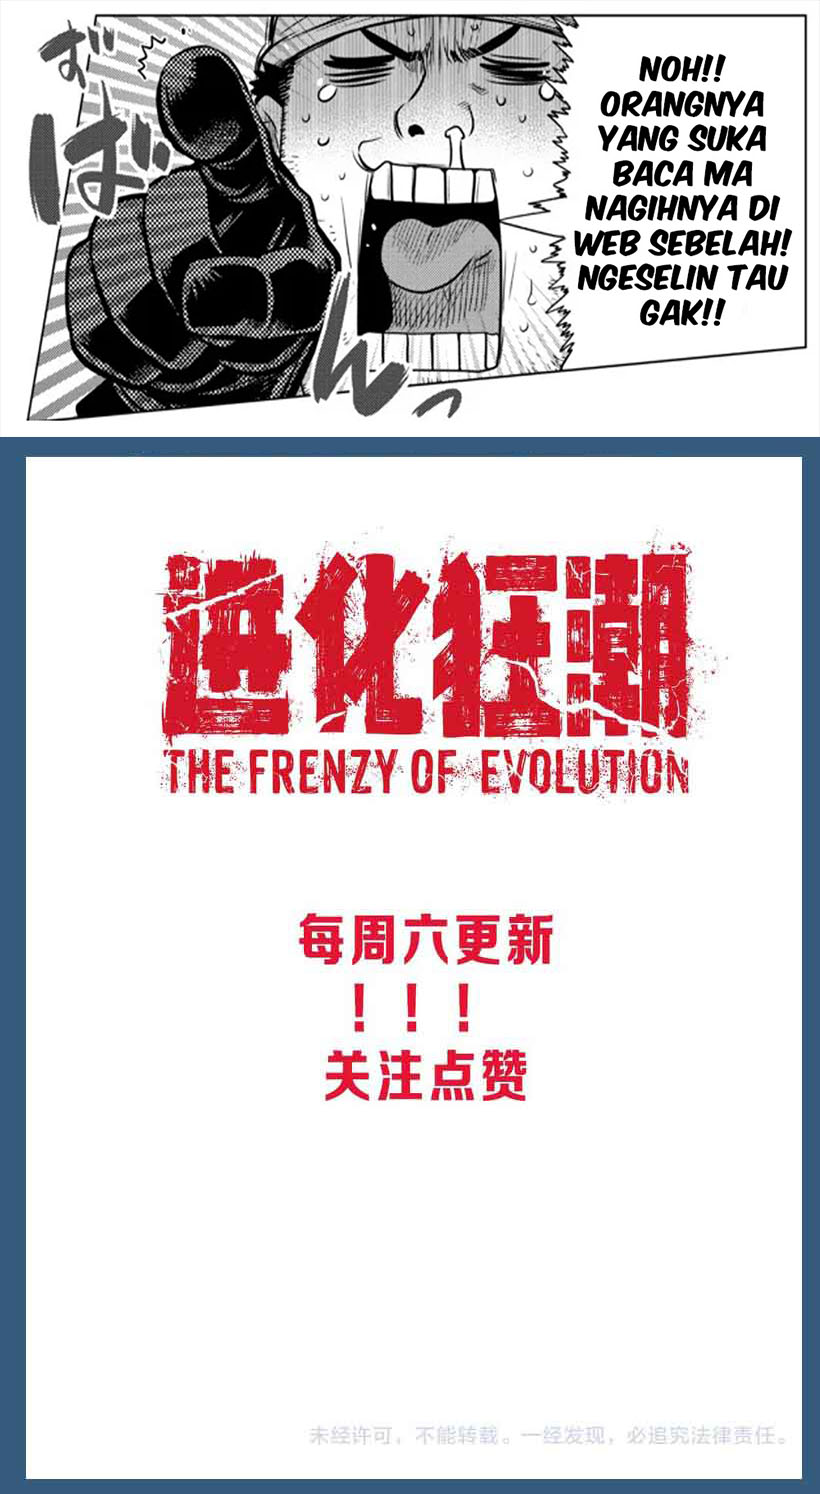 Evolution frenzy Chapter 07 bahasa indoensia